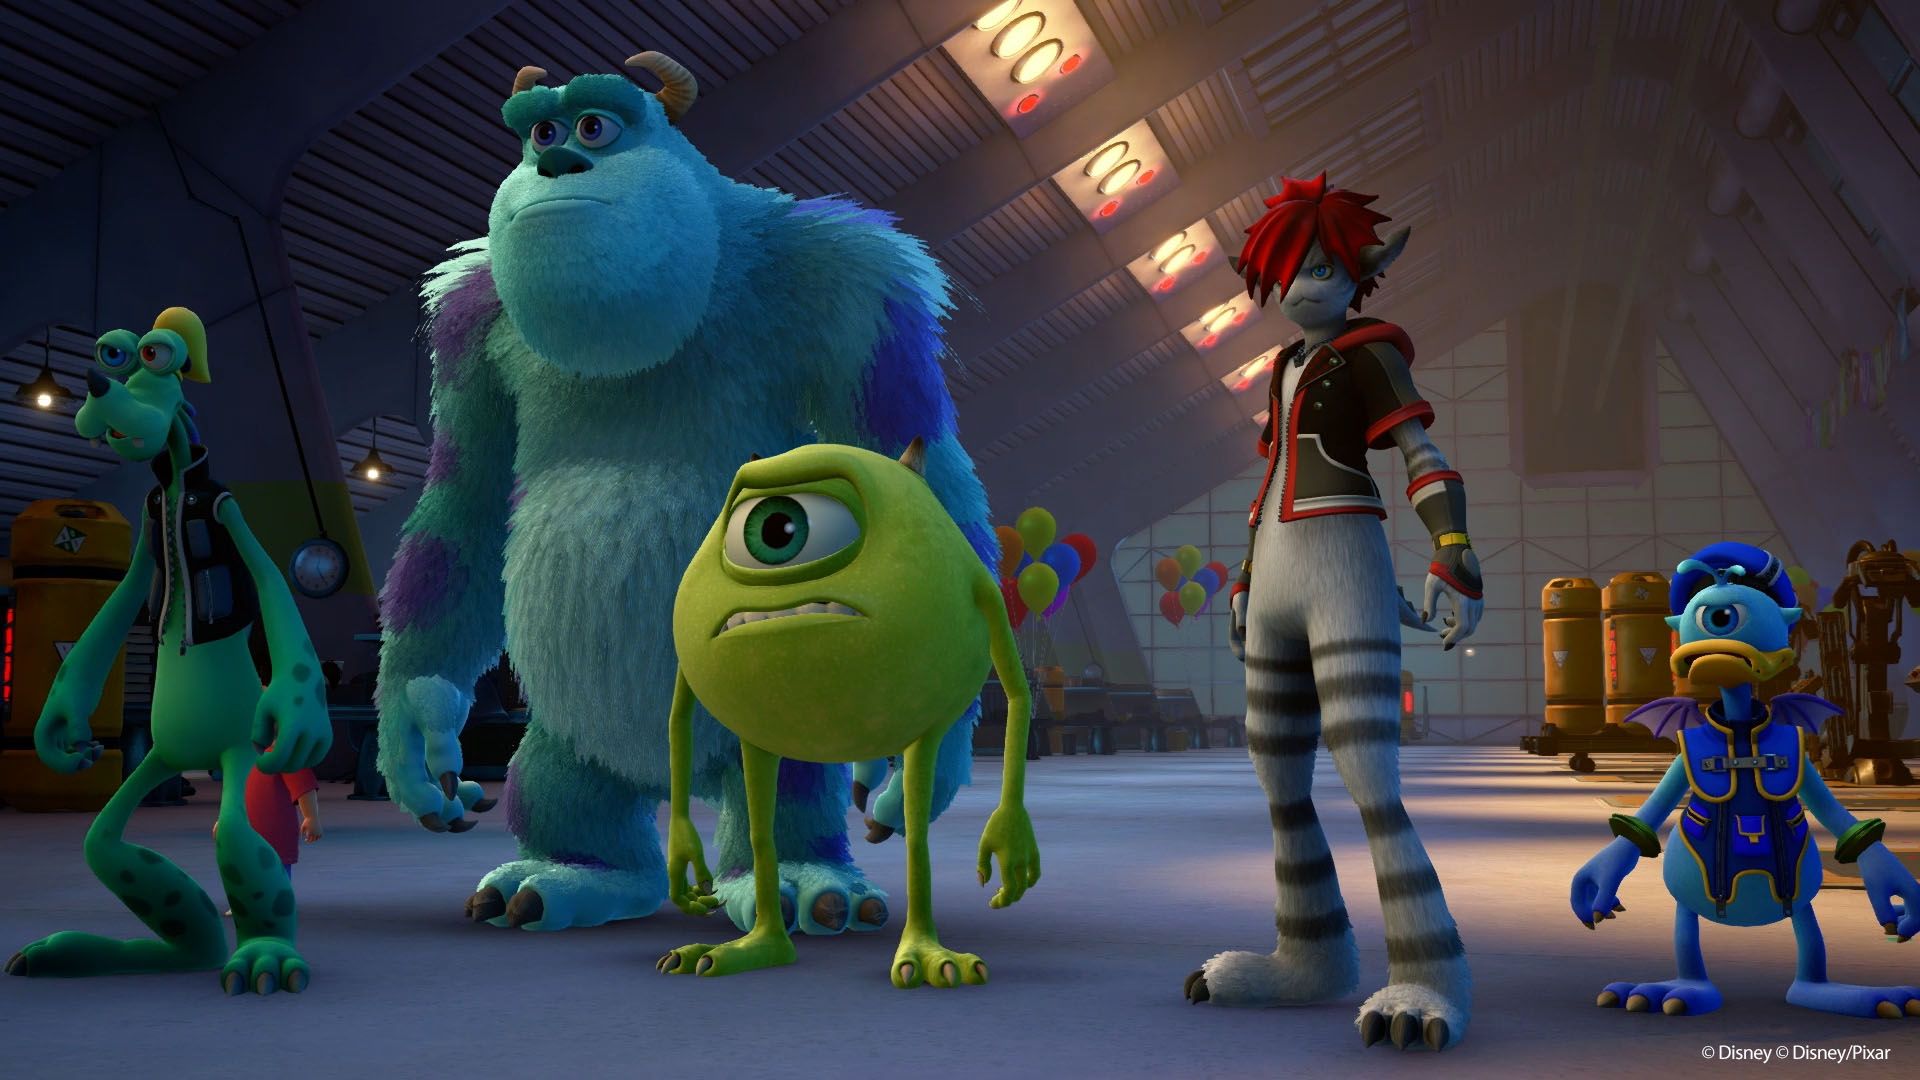 KH3 Mike and Sully